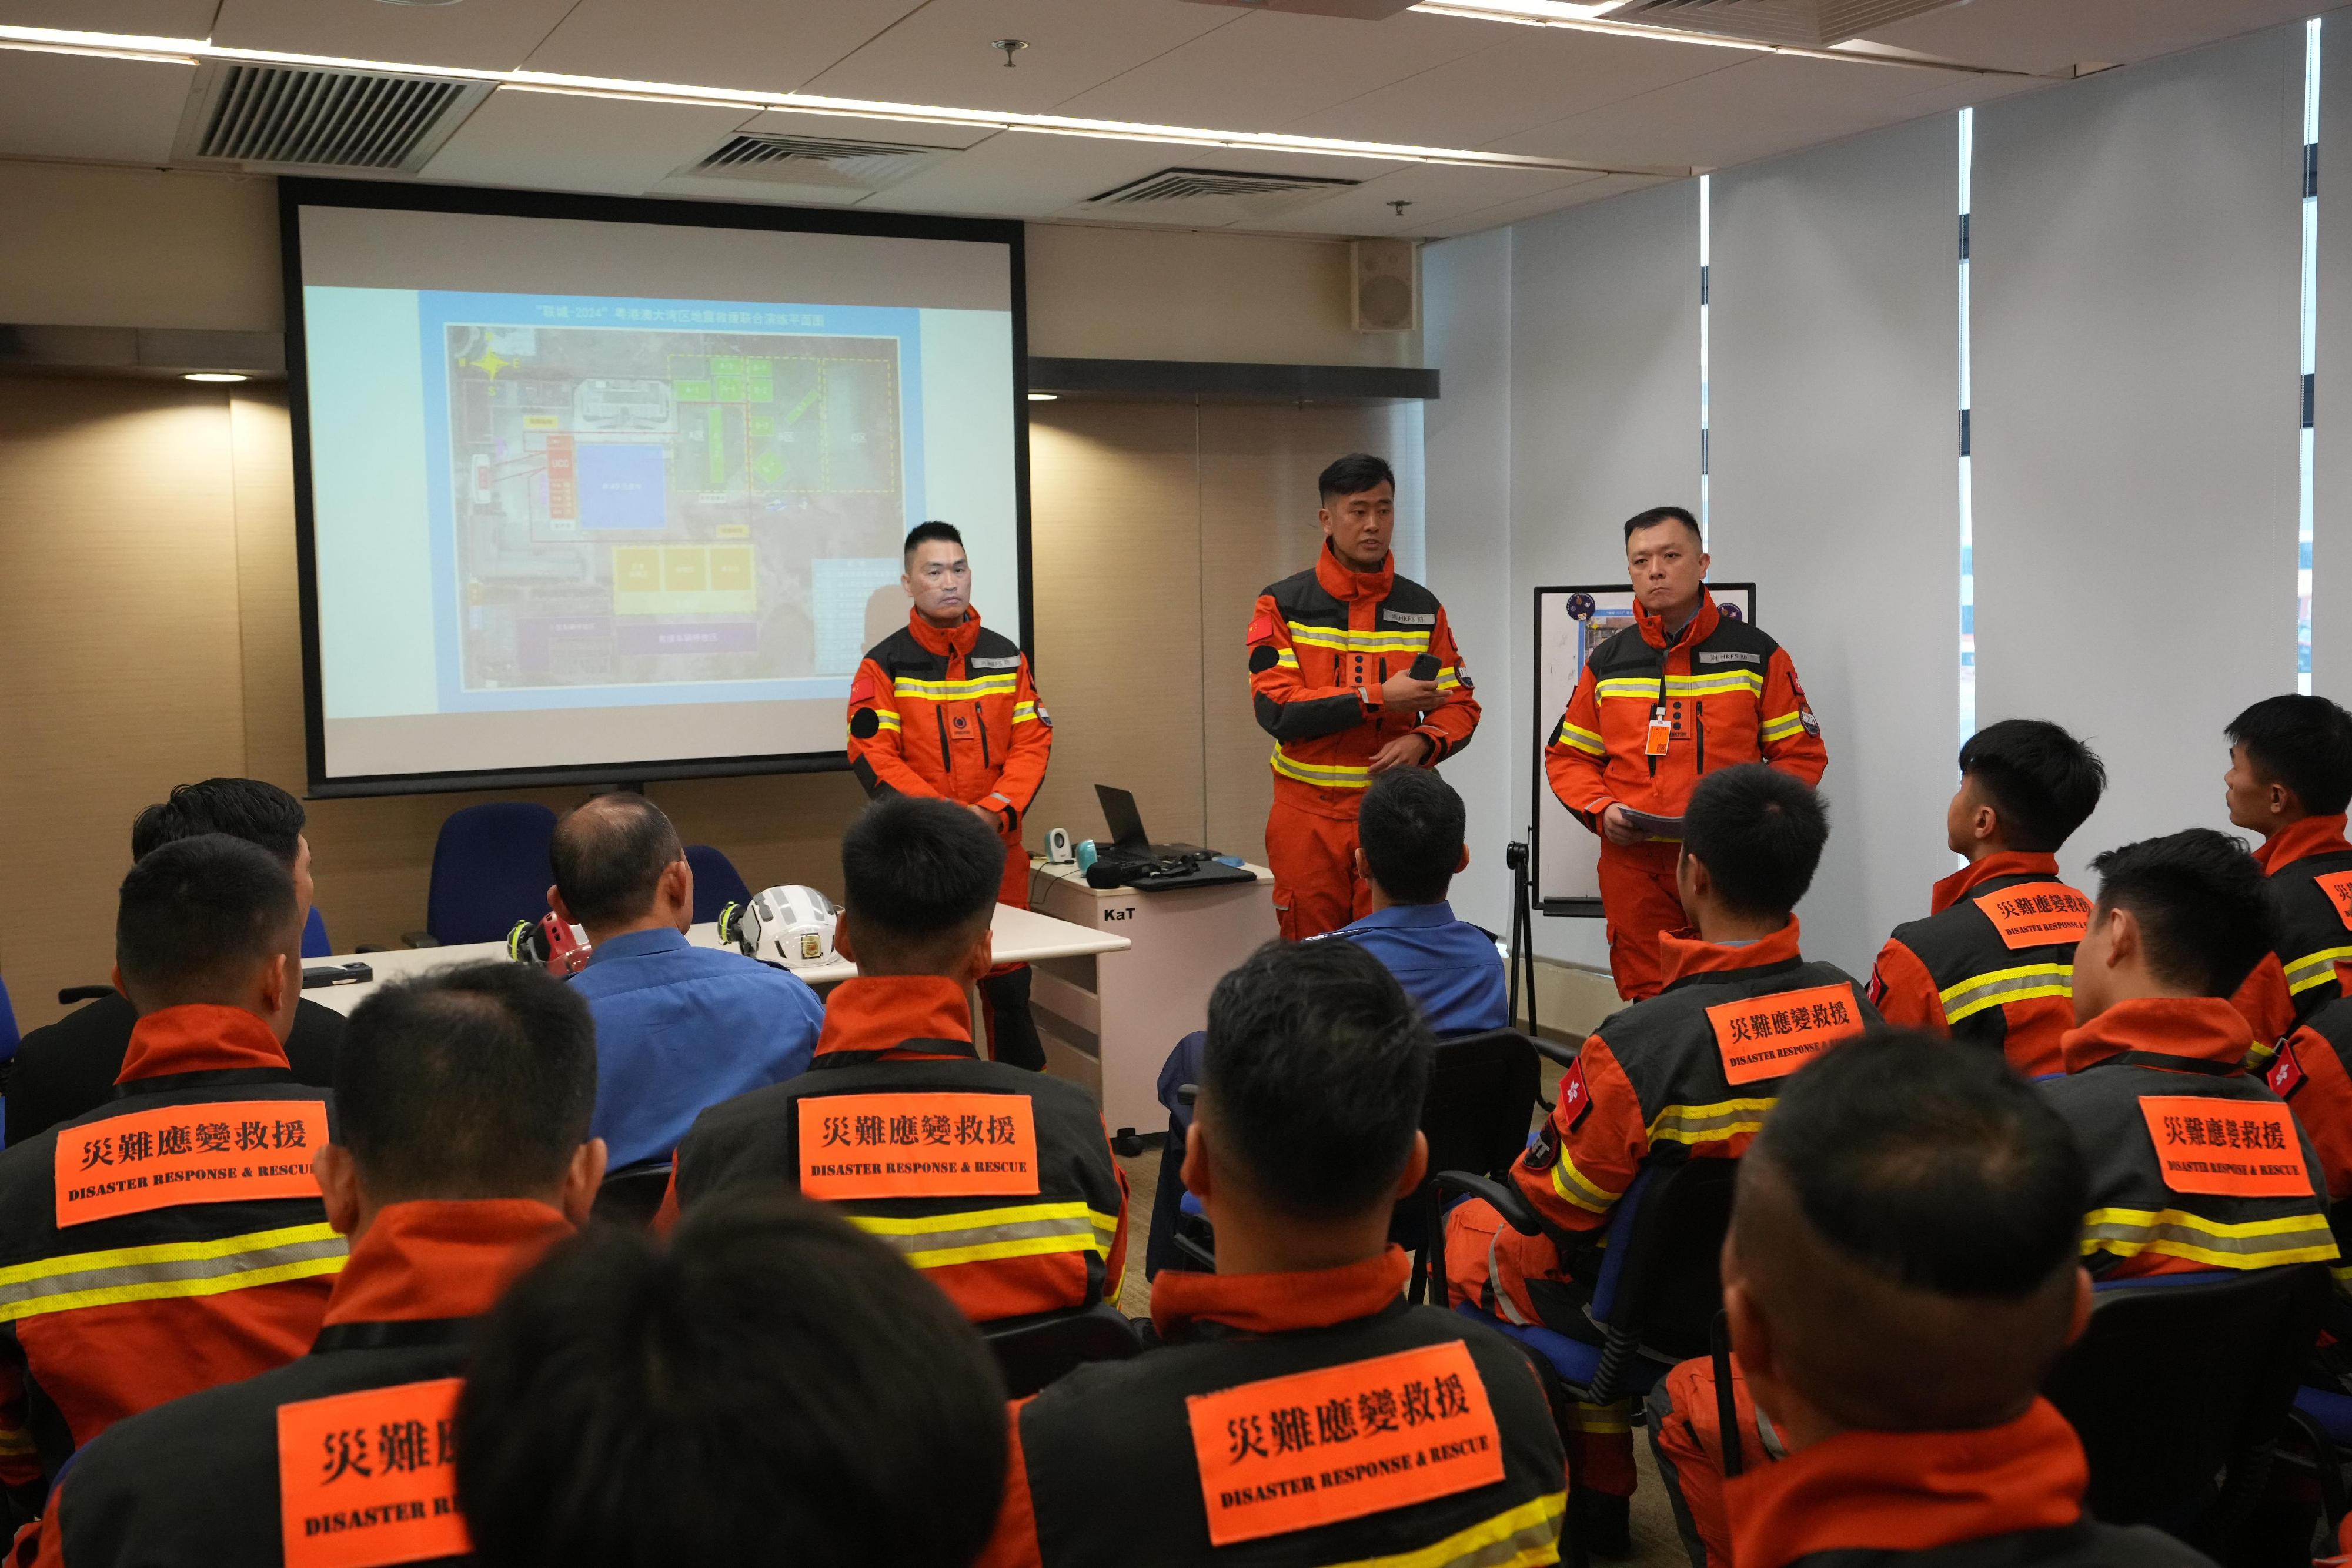 The Fire and Rescue Corps of Guangdong Province, the Hong Kong Fire Services Department (FSD) and the Macao Fire Services Bureau have conducted the Guangdong-Hong Kong-Macao Greater Bay Area joint emergency response and rescue exercise "Liancheng-2024" in Jiangmen, Guangdong Province from May 27 to today (May 29). Photo shows members of the Disaster Response and Rescue Team of the FSD listening to a briefing before departure at Kai Tak Fire Station.